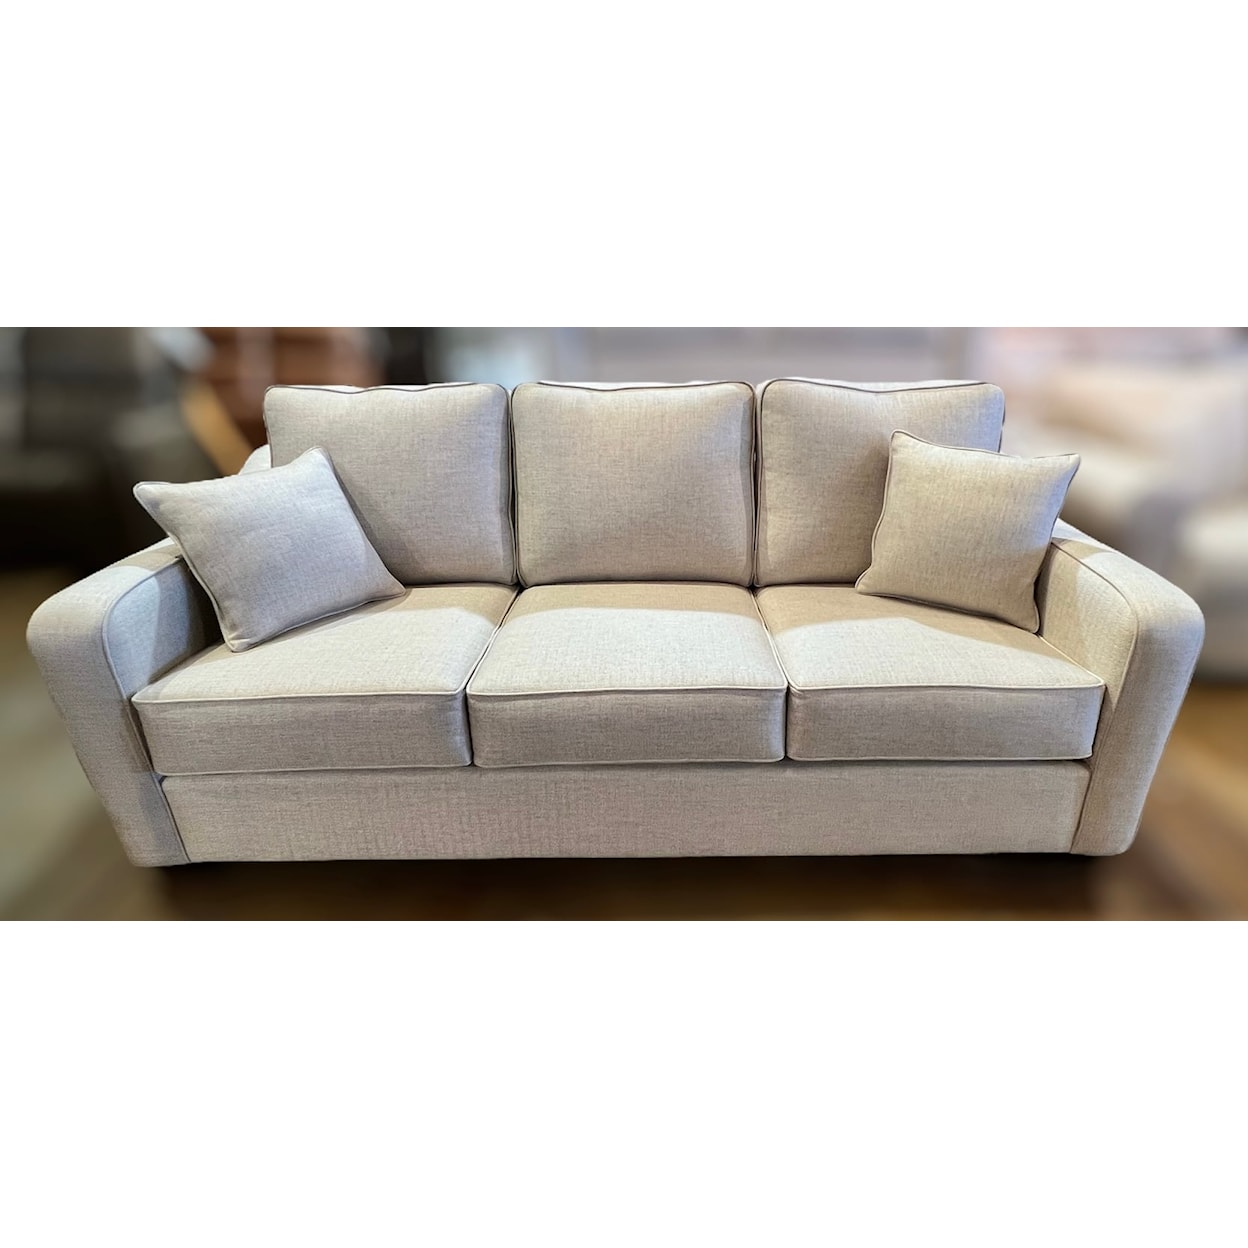 Sussex Upholstery Co. Stacy Stacy 3 Cushion Sofa